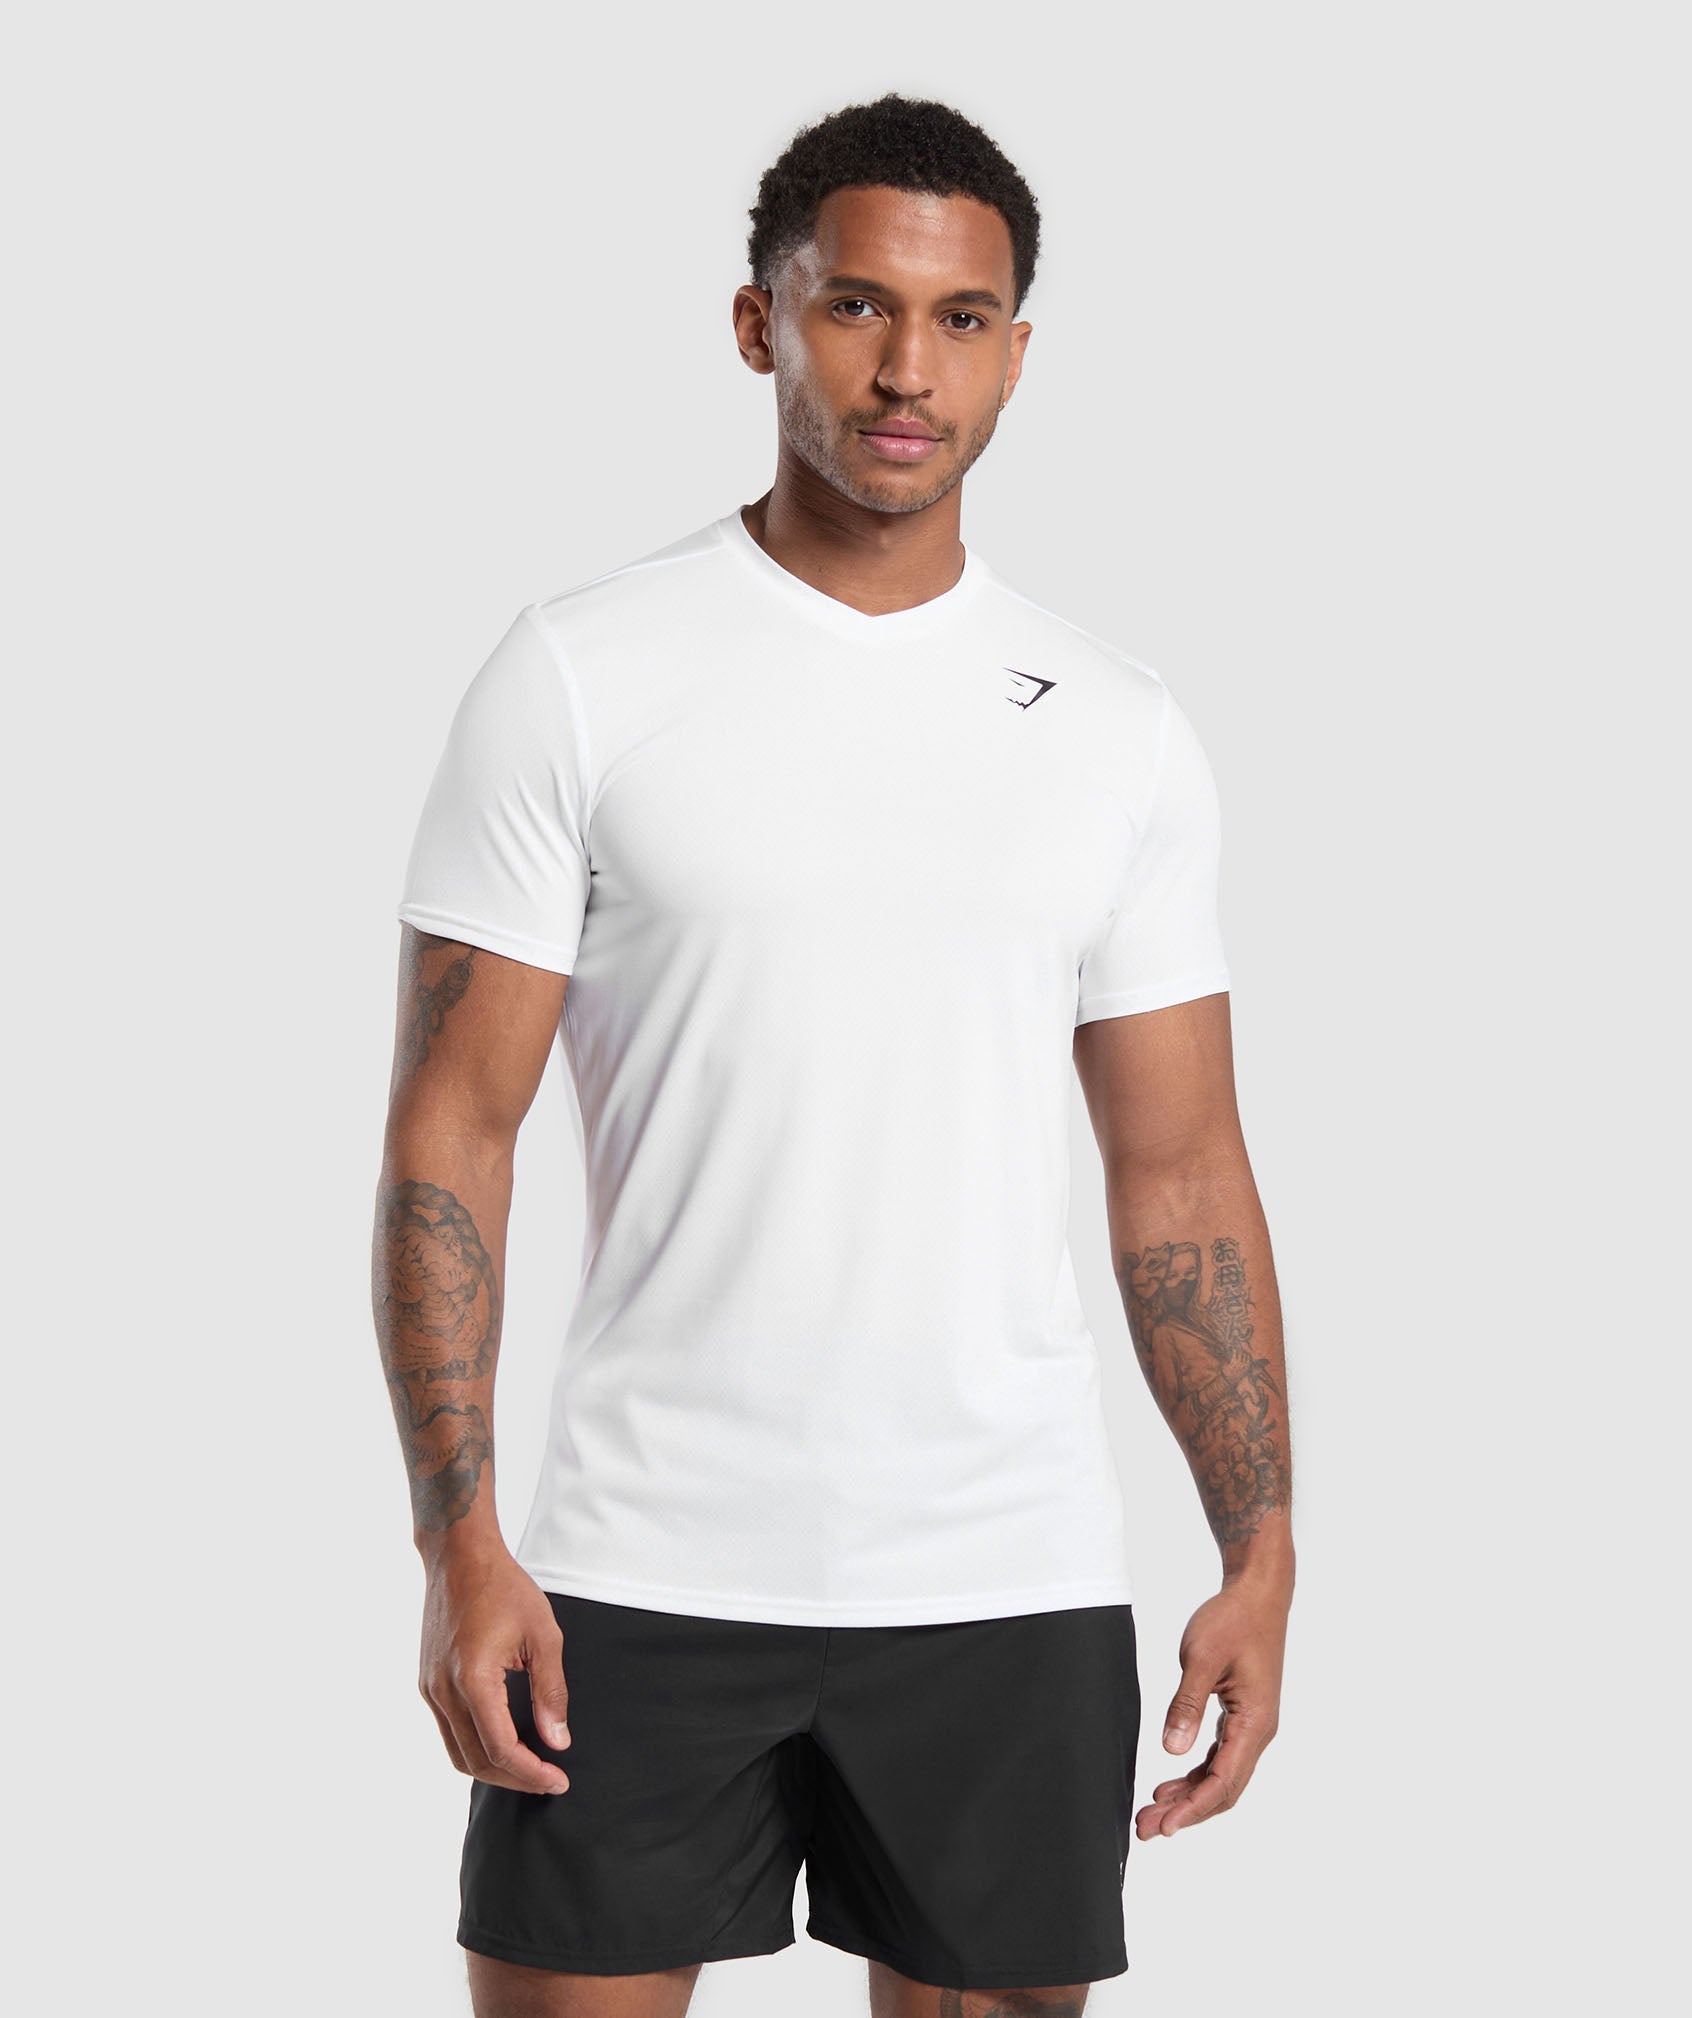 Arrival V-Neck T Shirt in White - view 1